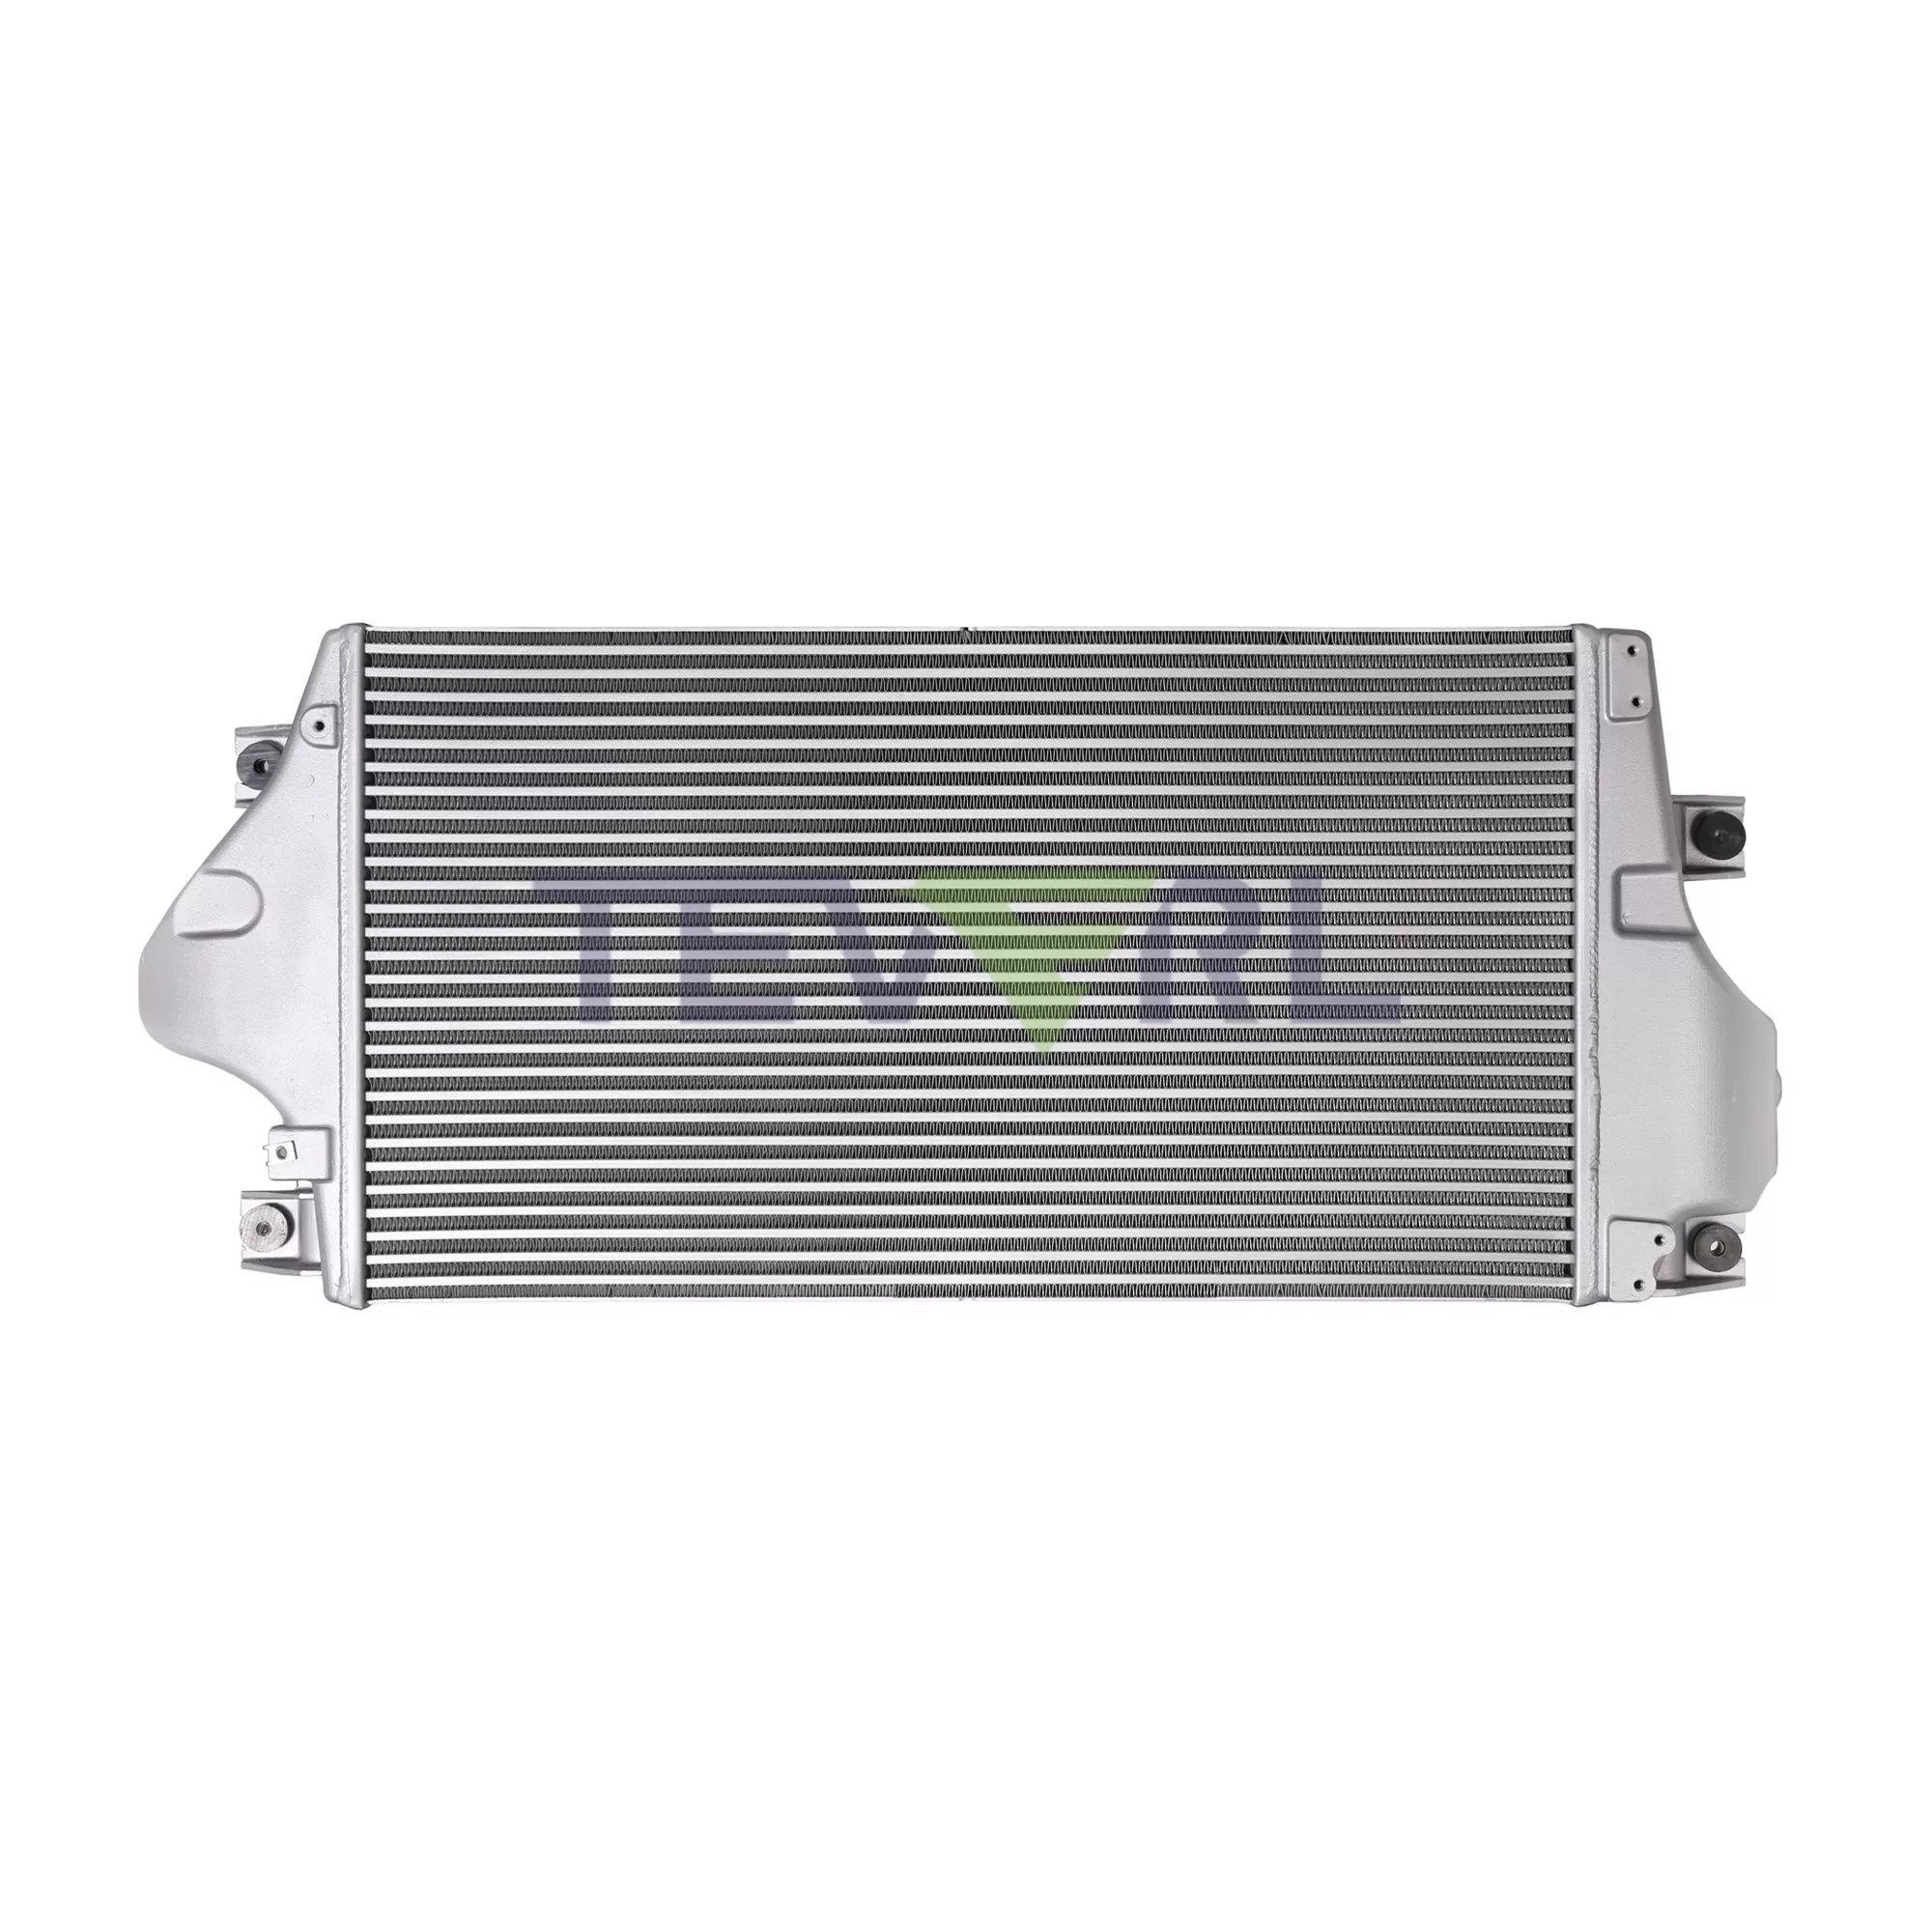 10602006 International Charge Air Cooler